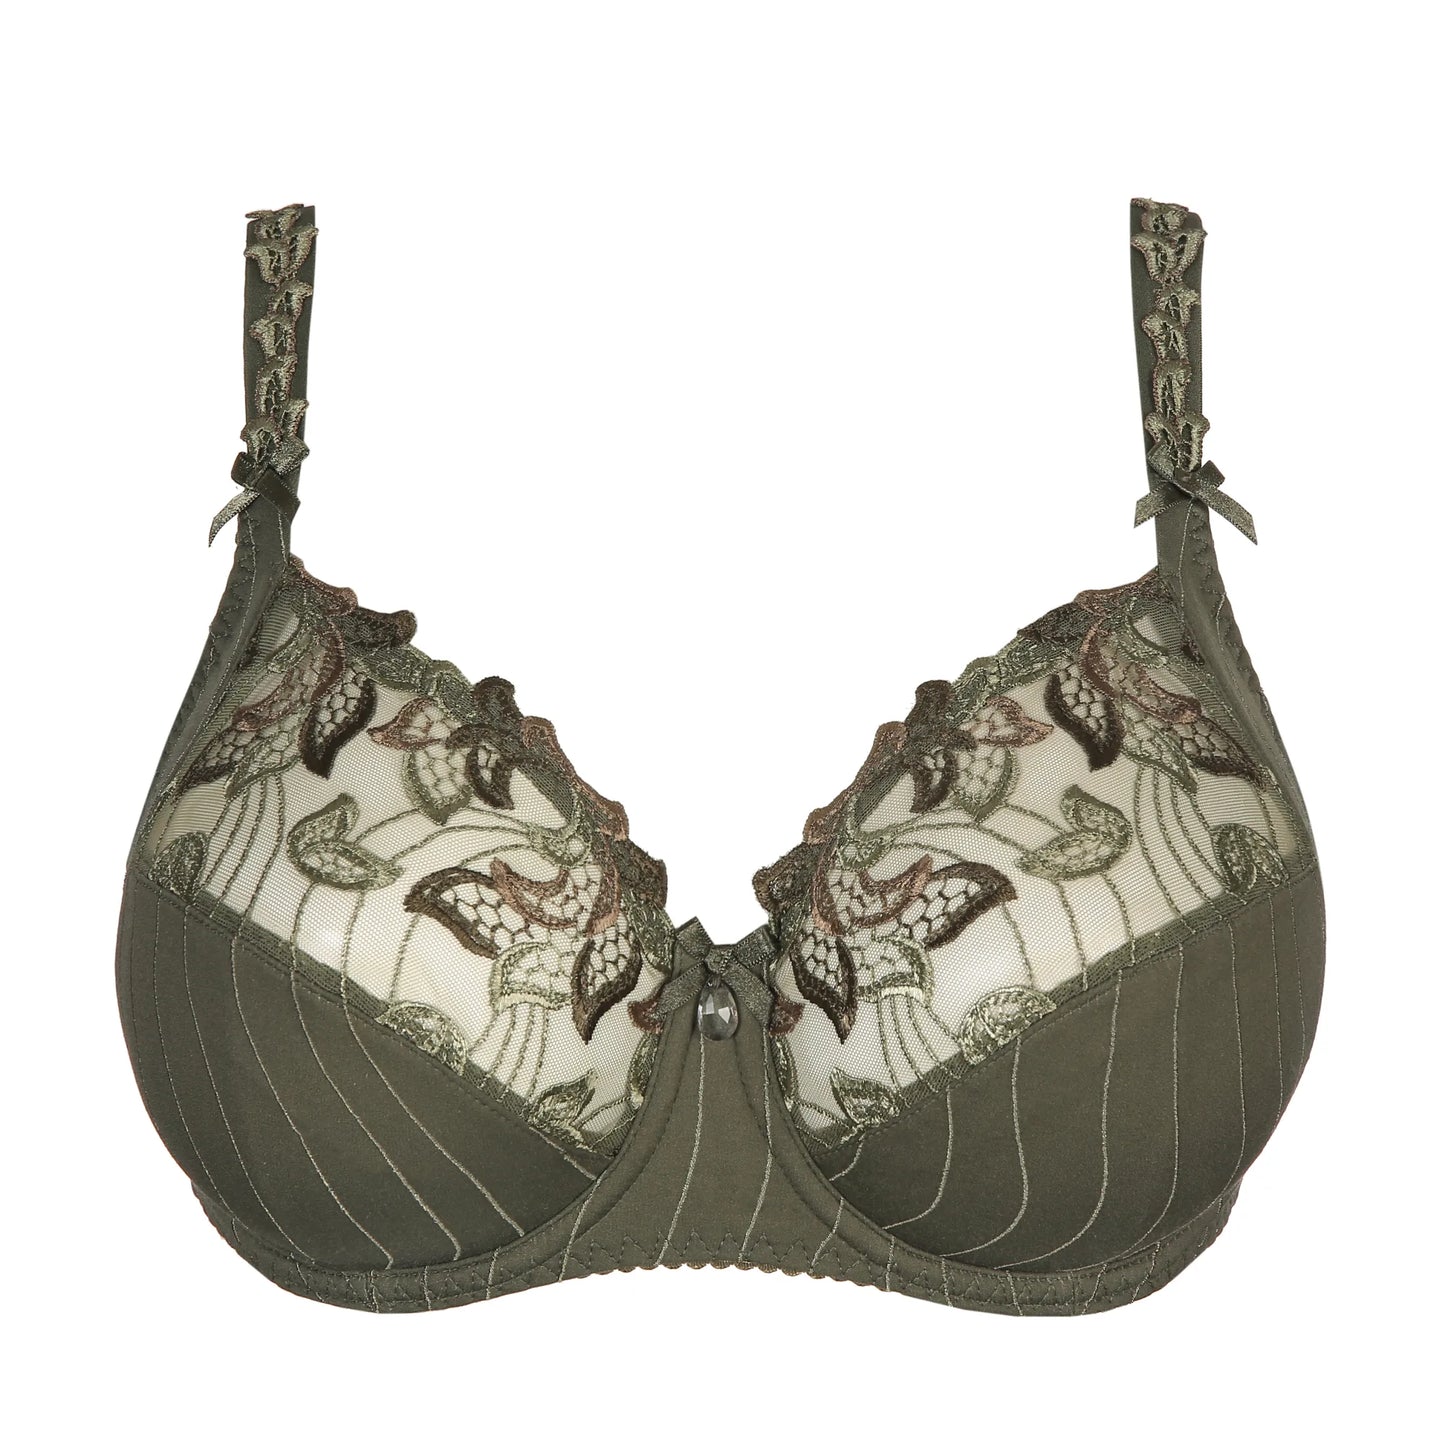 Prima Donna Beugel BH Deauville - 0161810/11 - Paradise Green